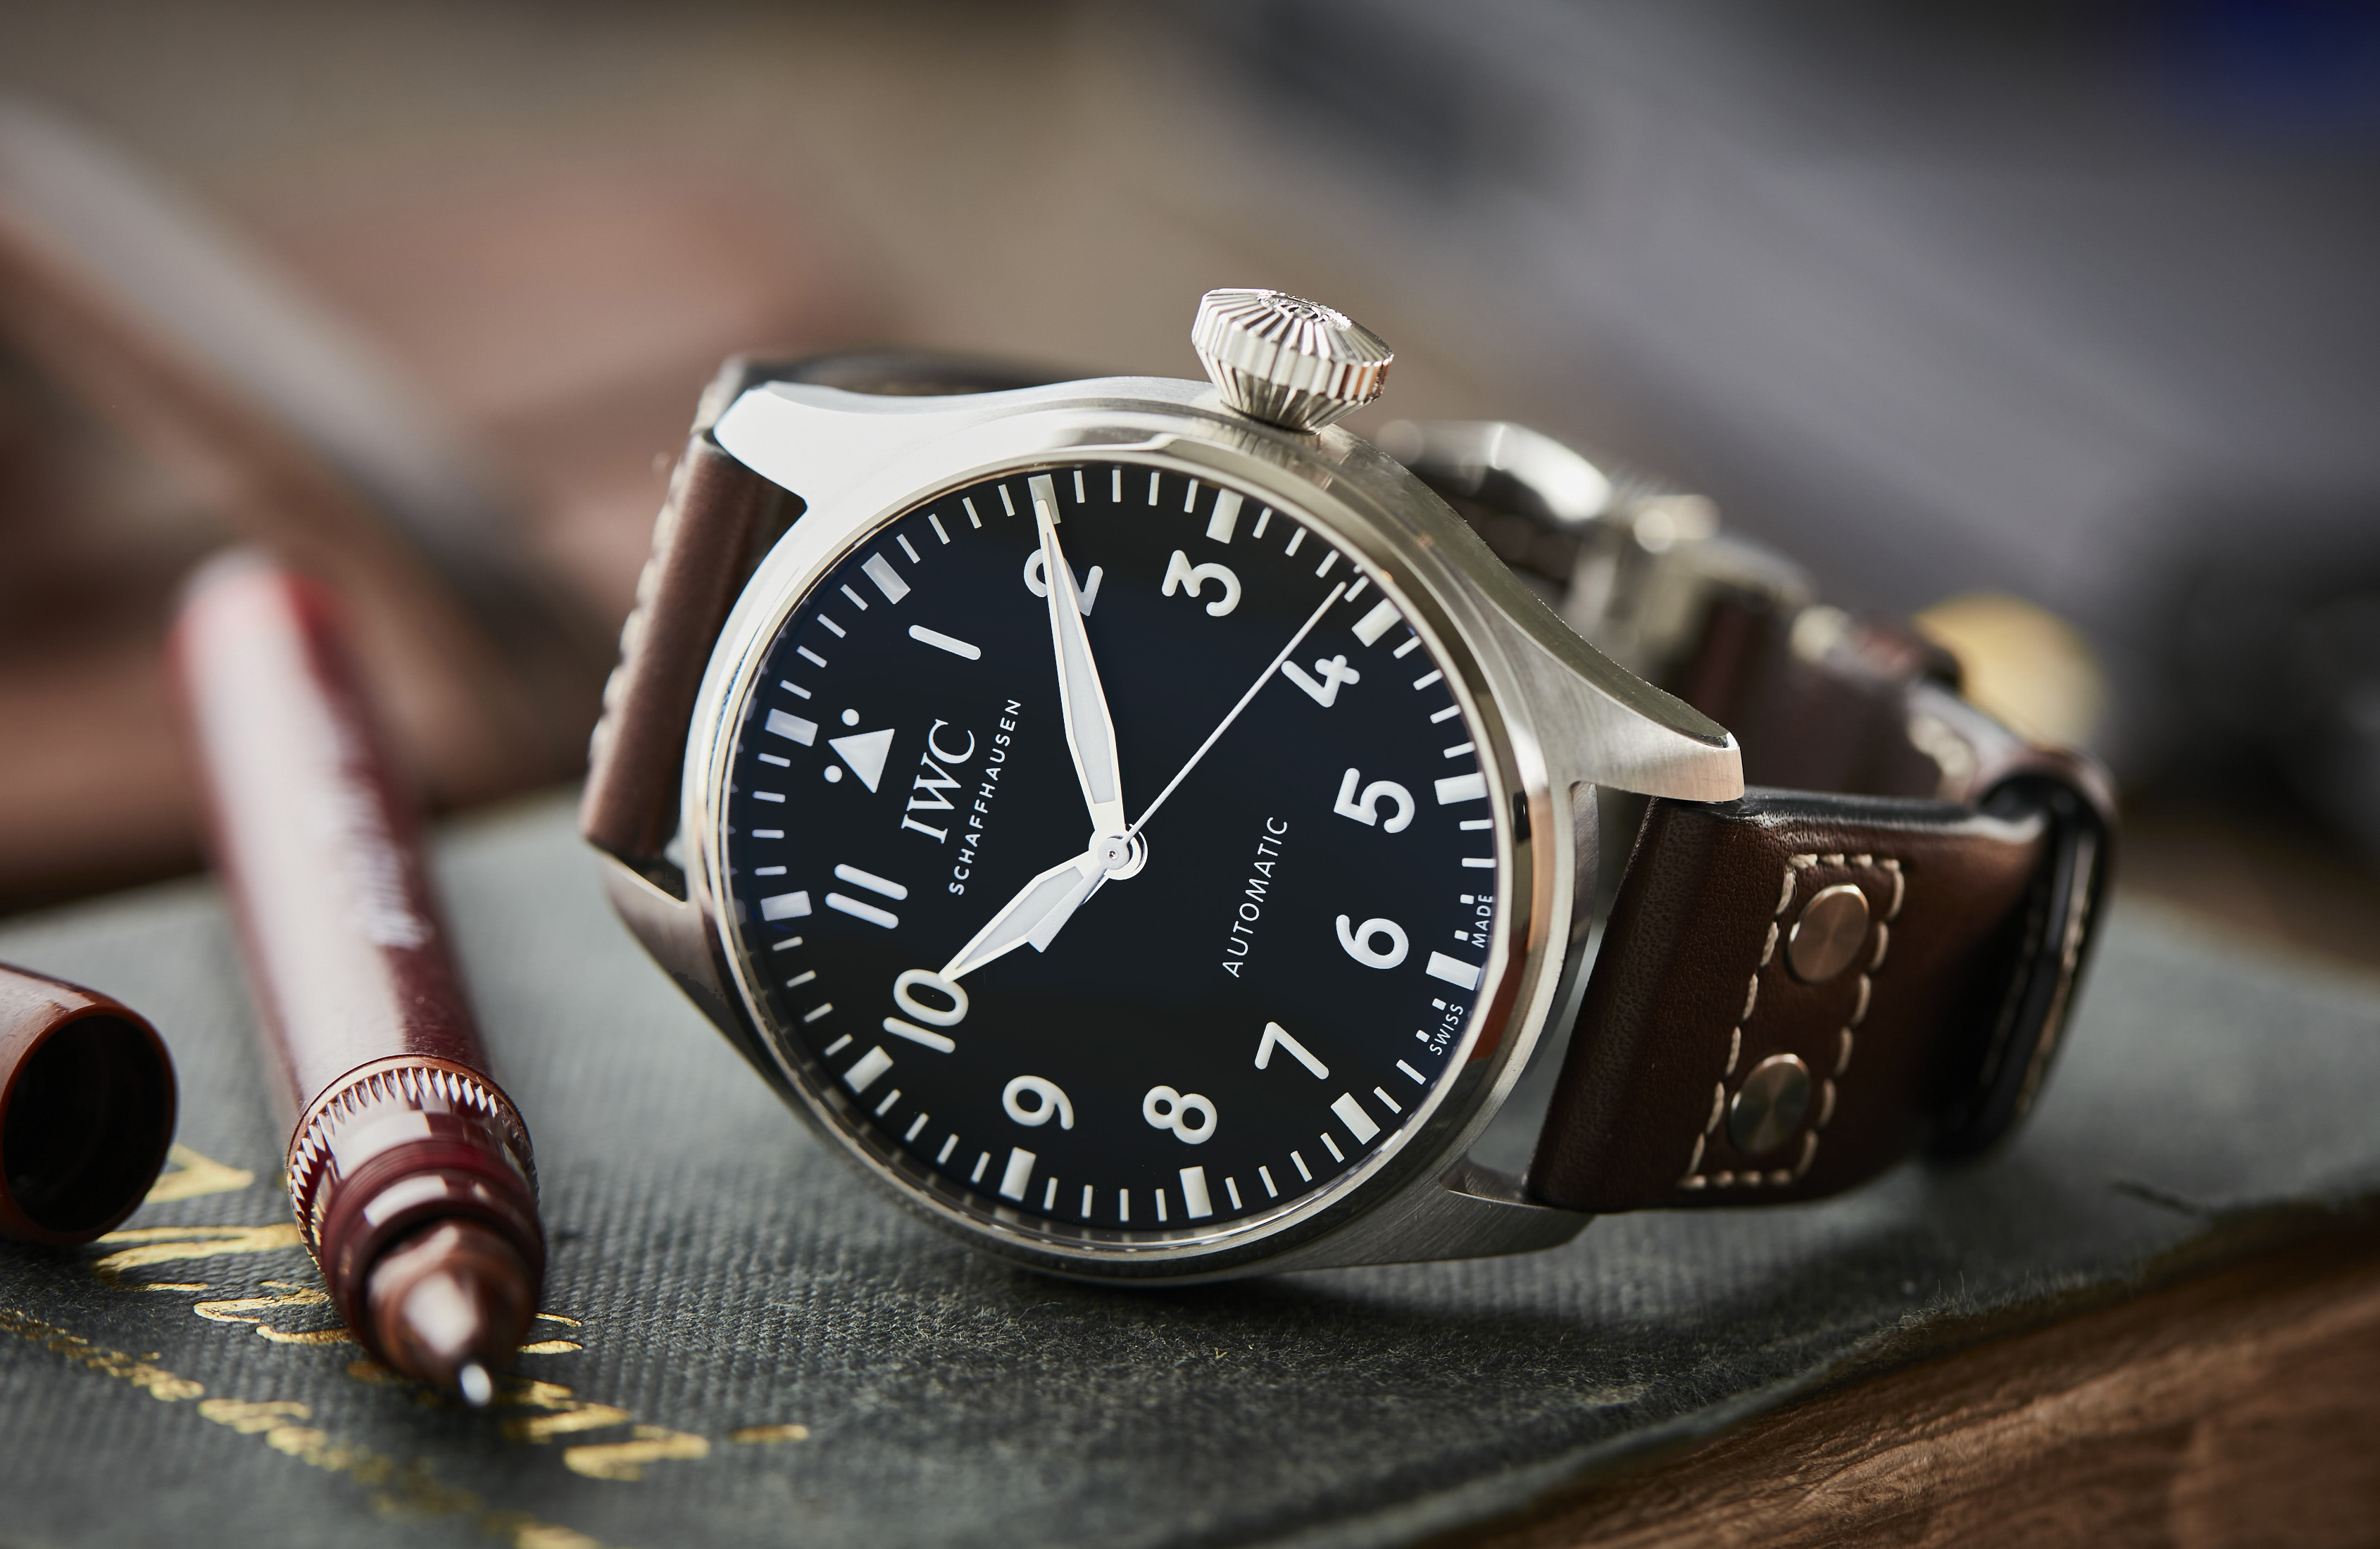 VIDEO: The IWC Big Pilot 43 gives an iconic watch a modern upgrade